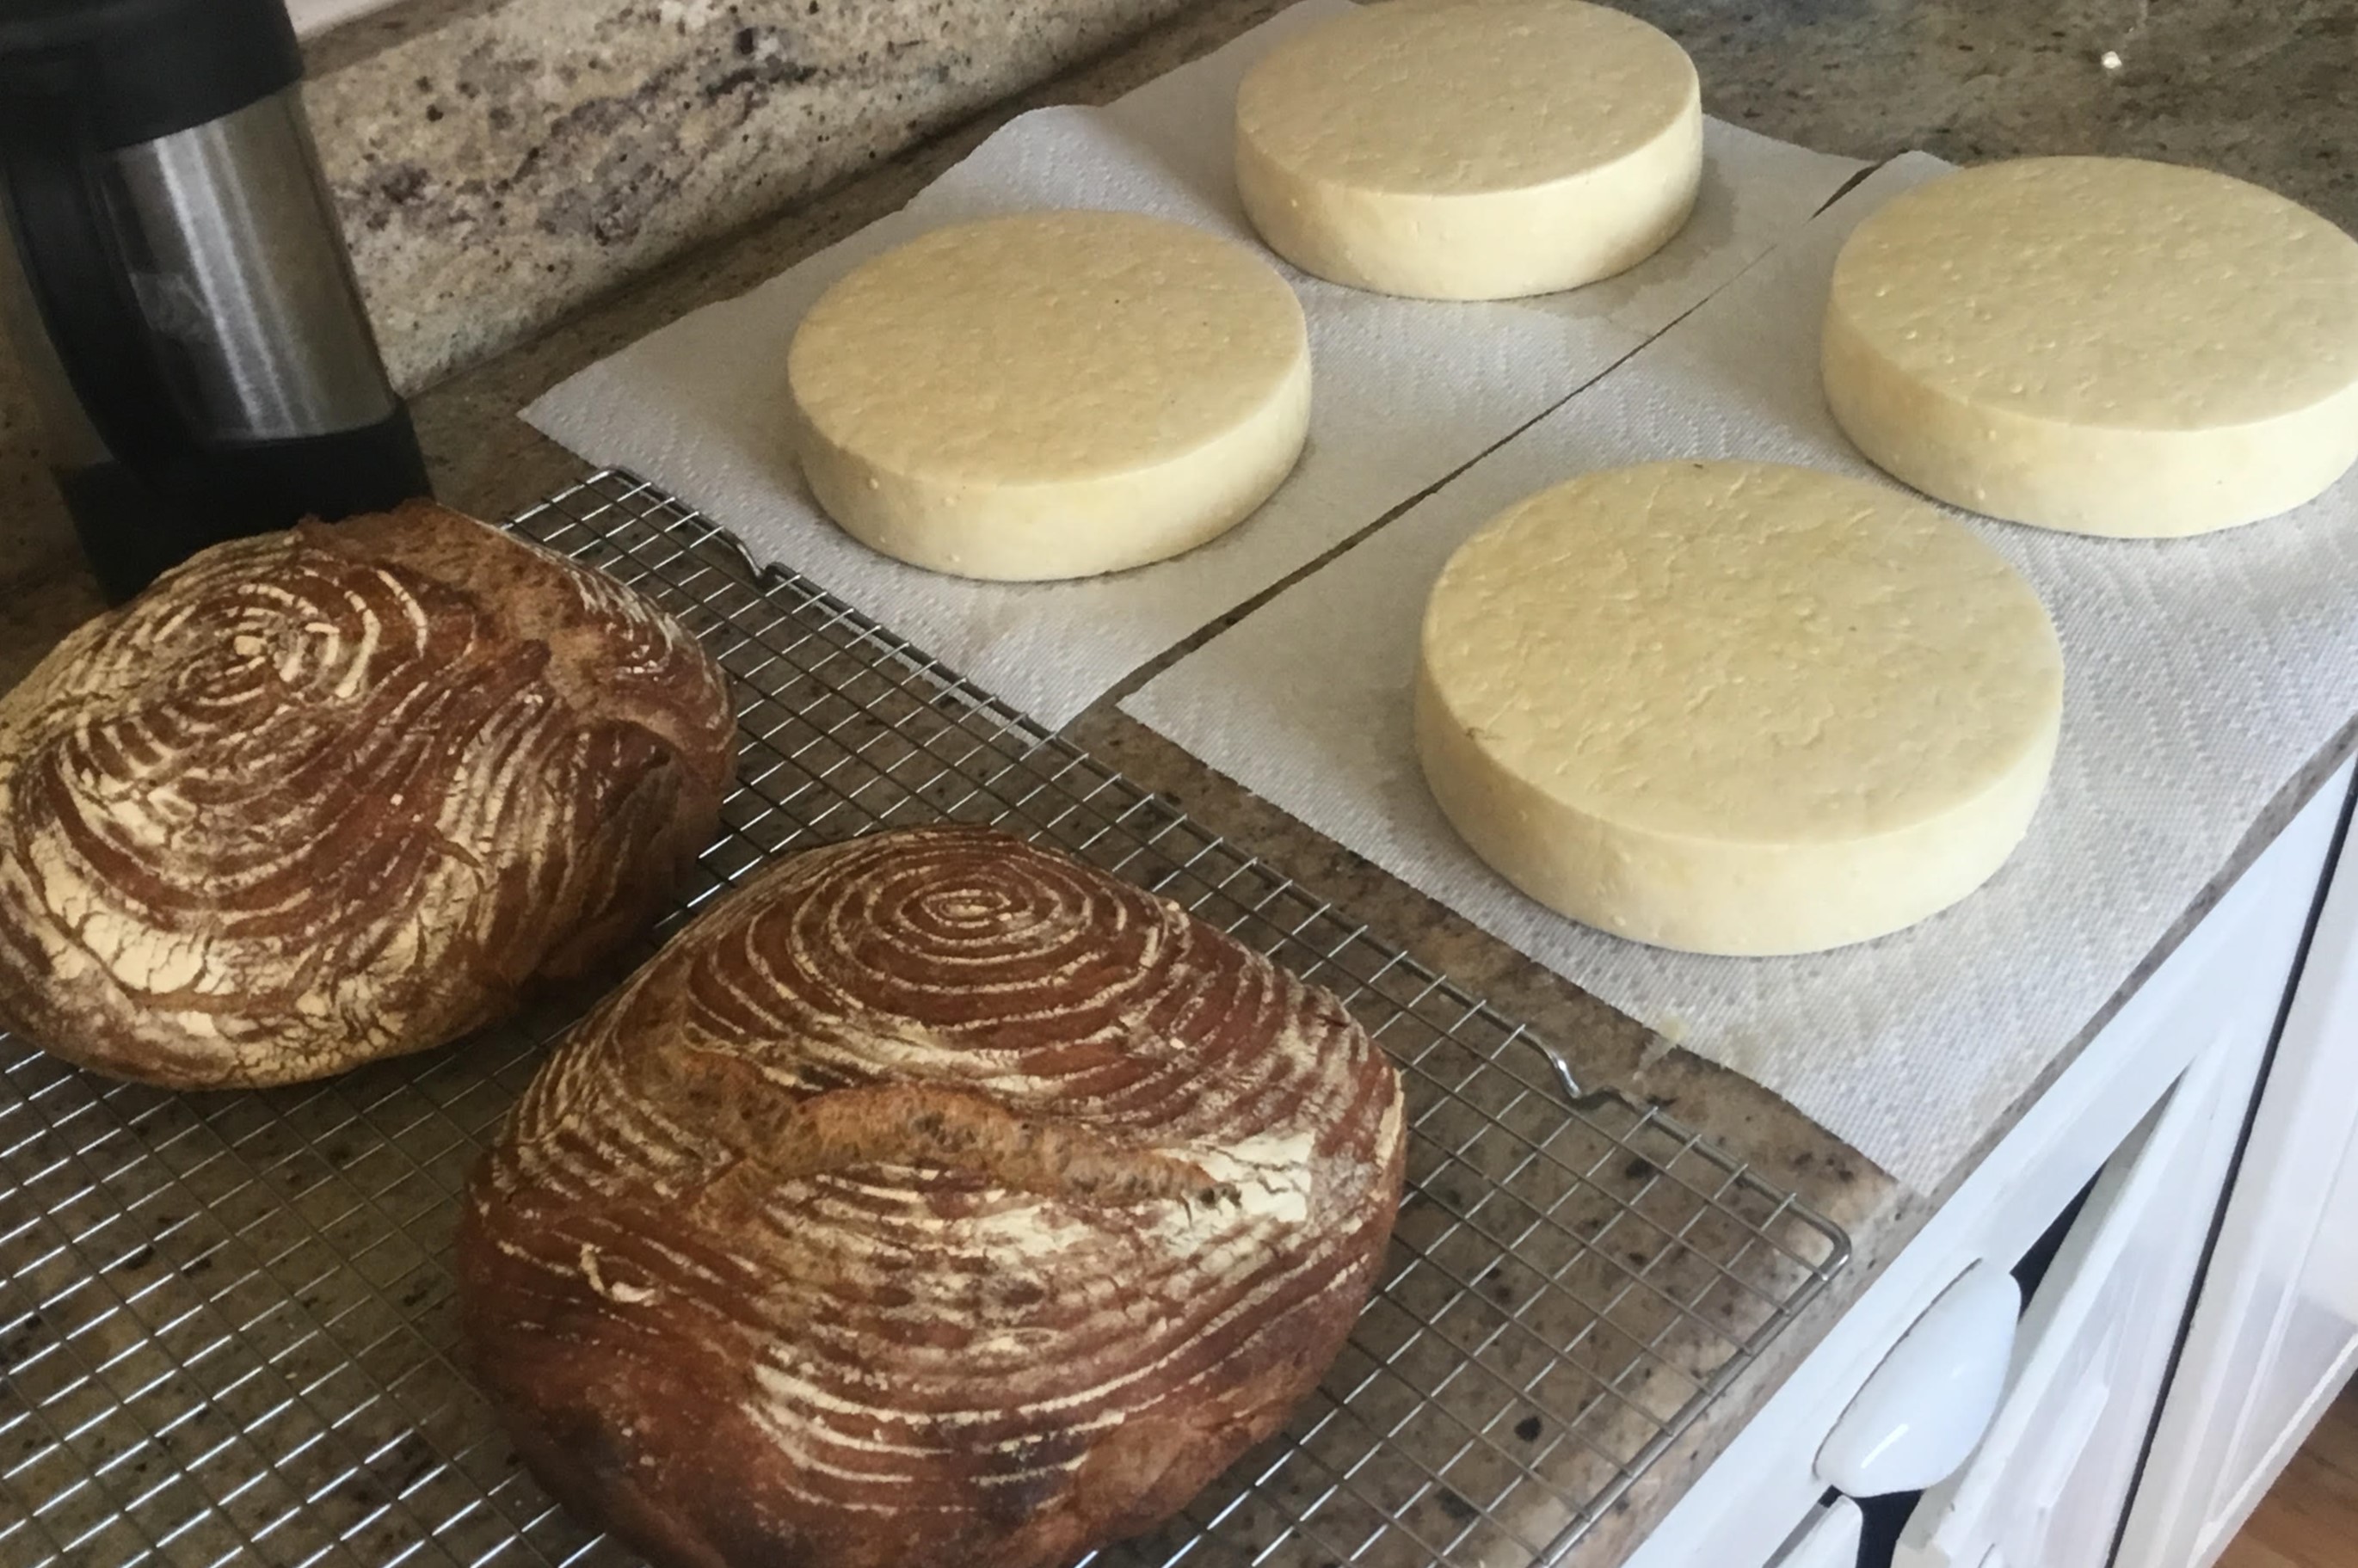 Homemade bread and cheeses